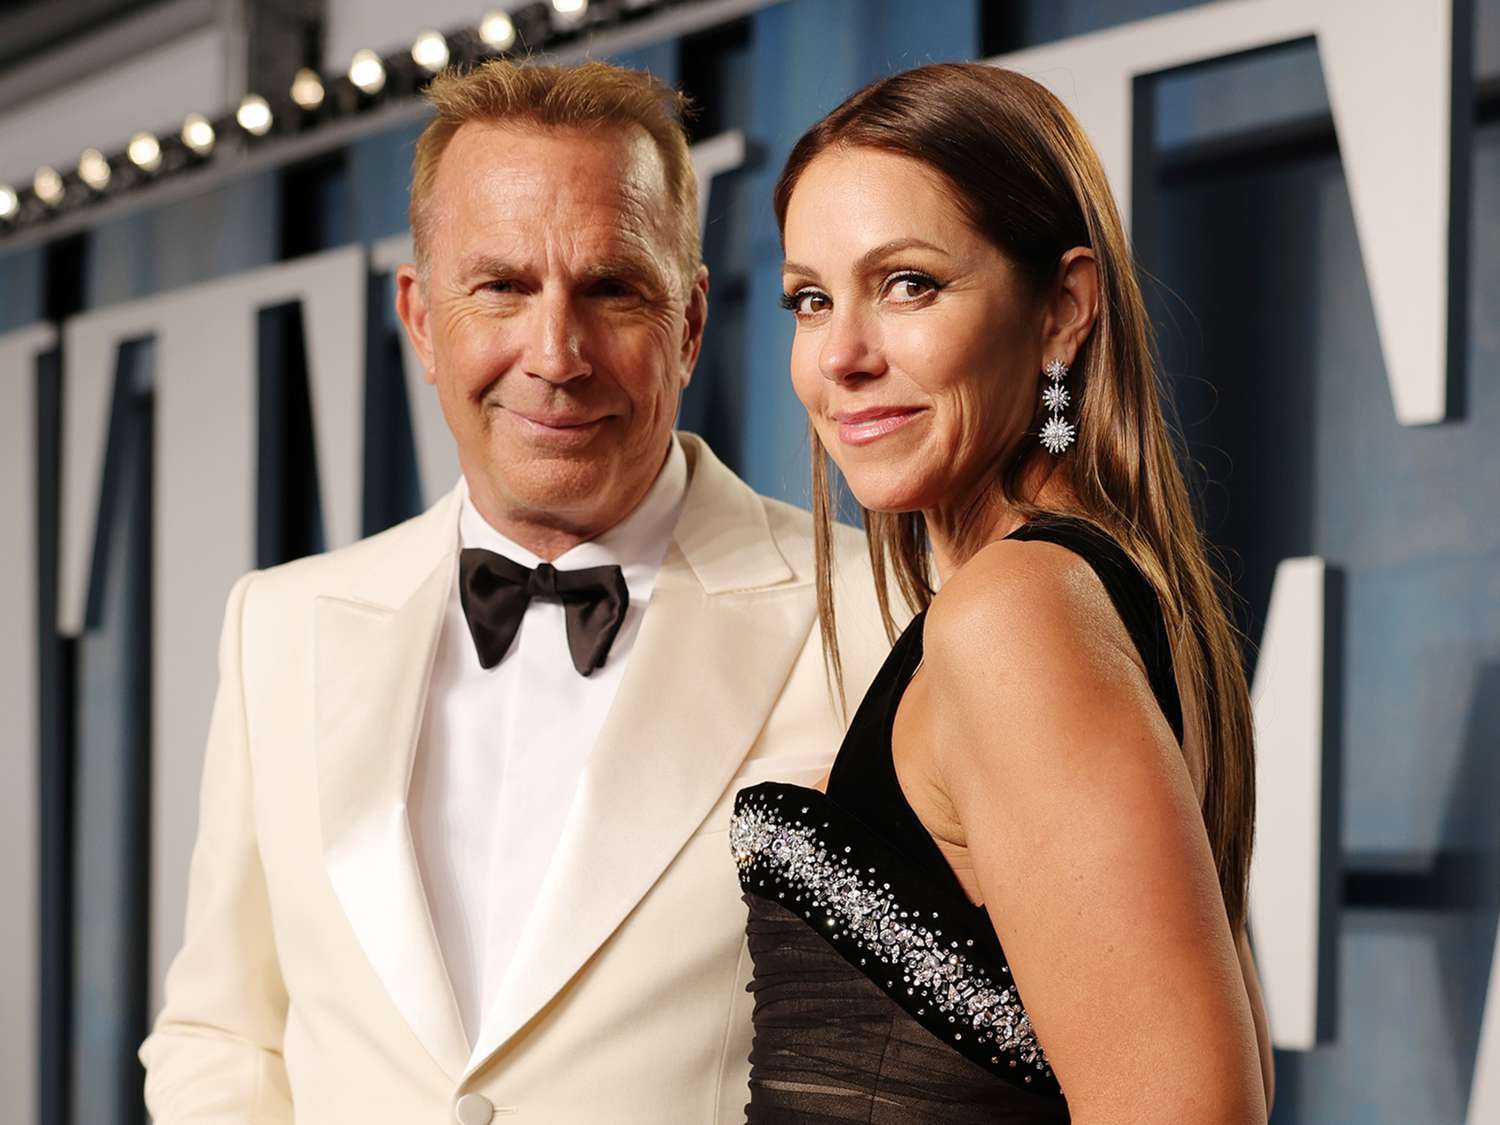 Kevin Costner Ordered to Pay Estranged Wife Christine $63K per Month in Child Support After She Asked for $162K